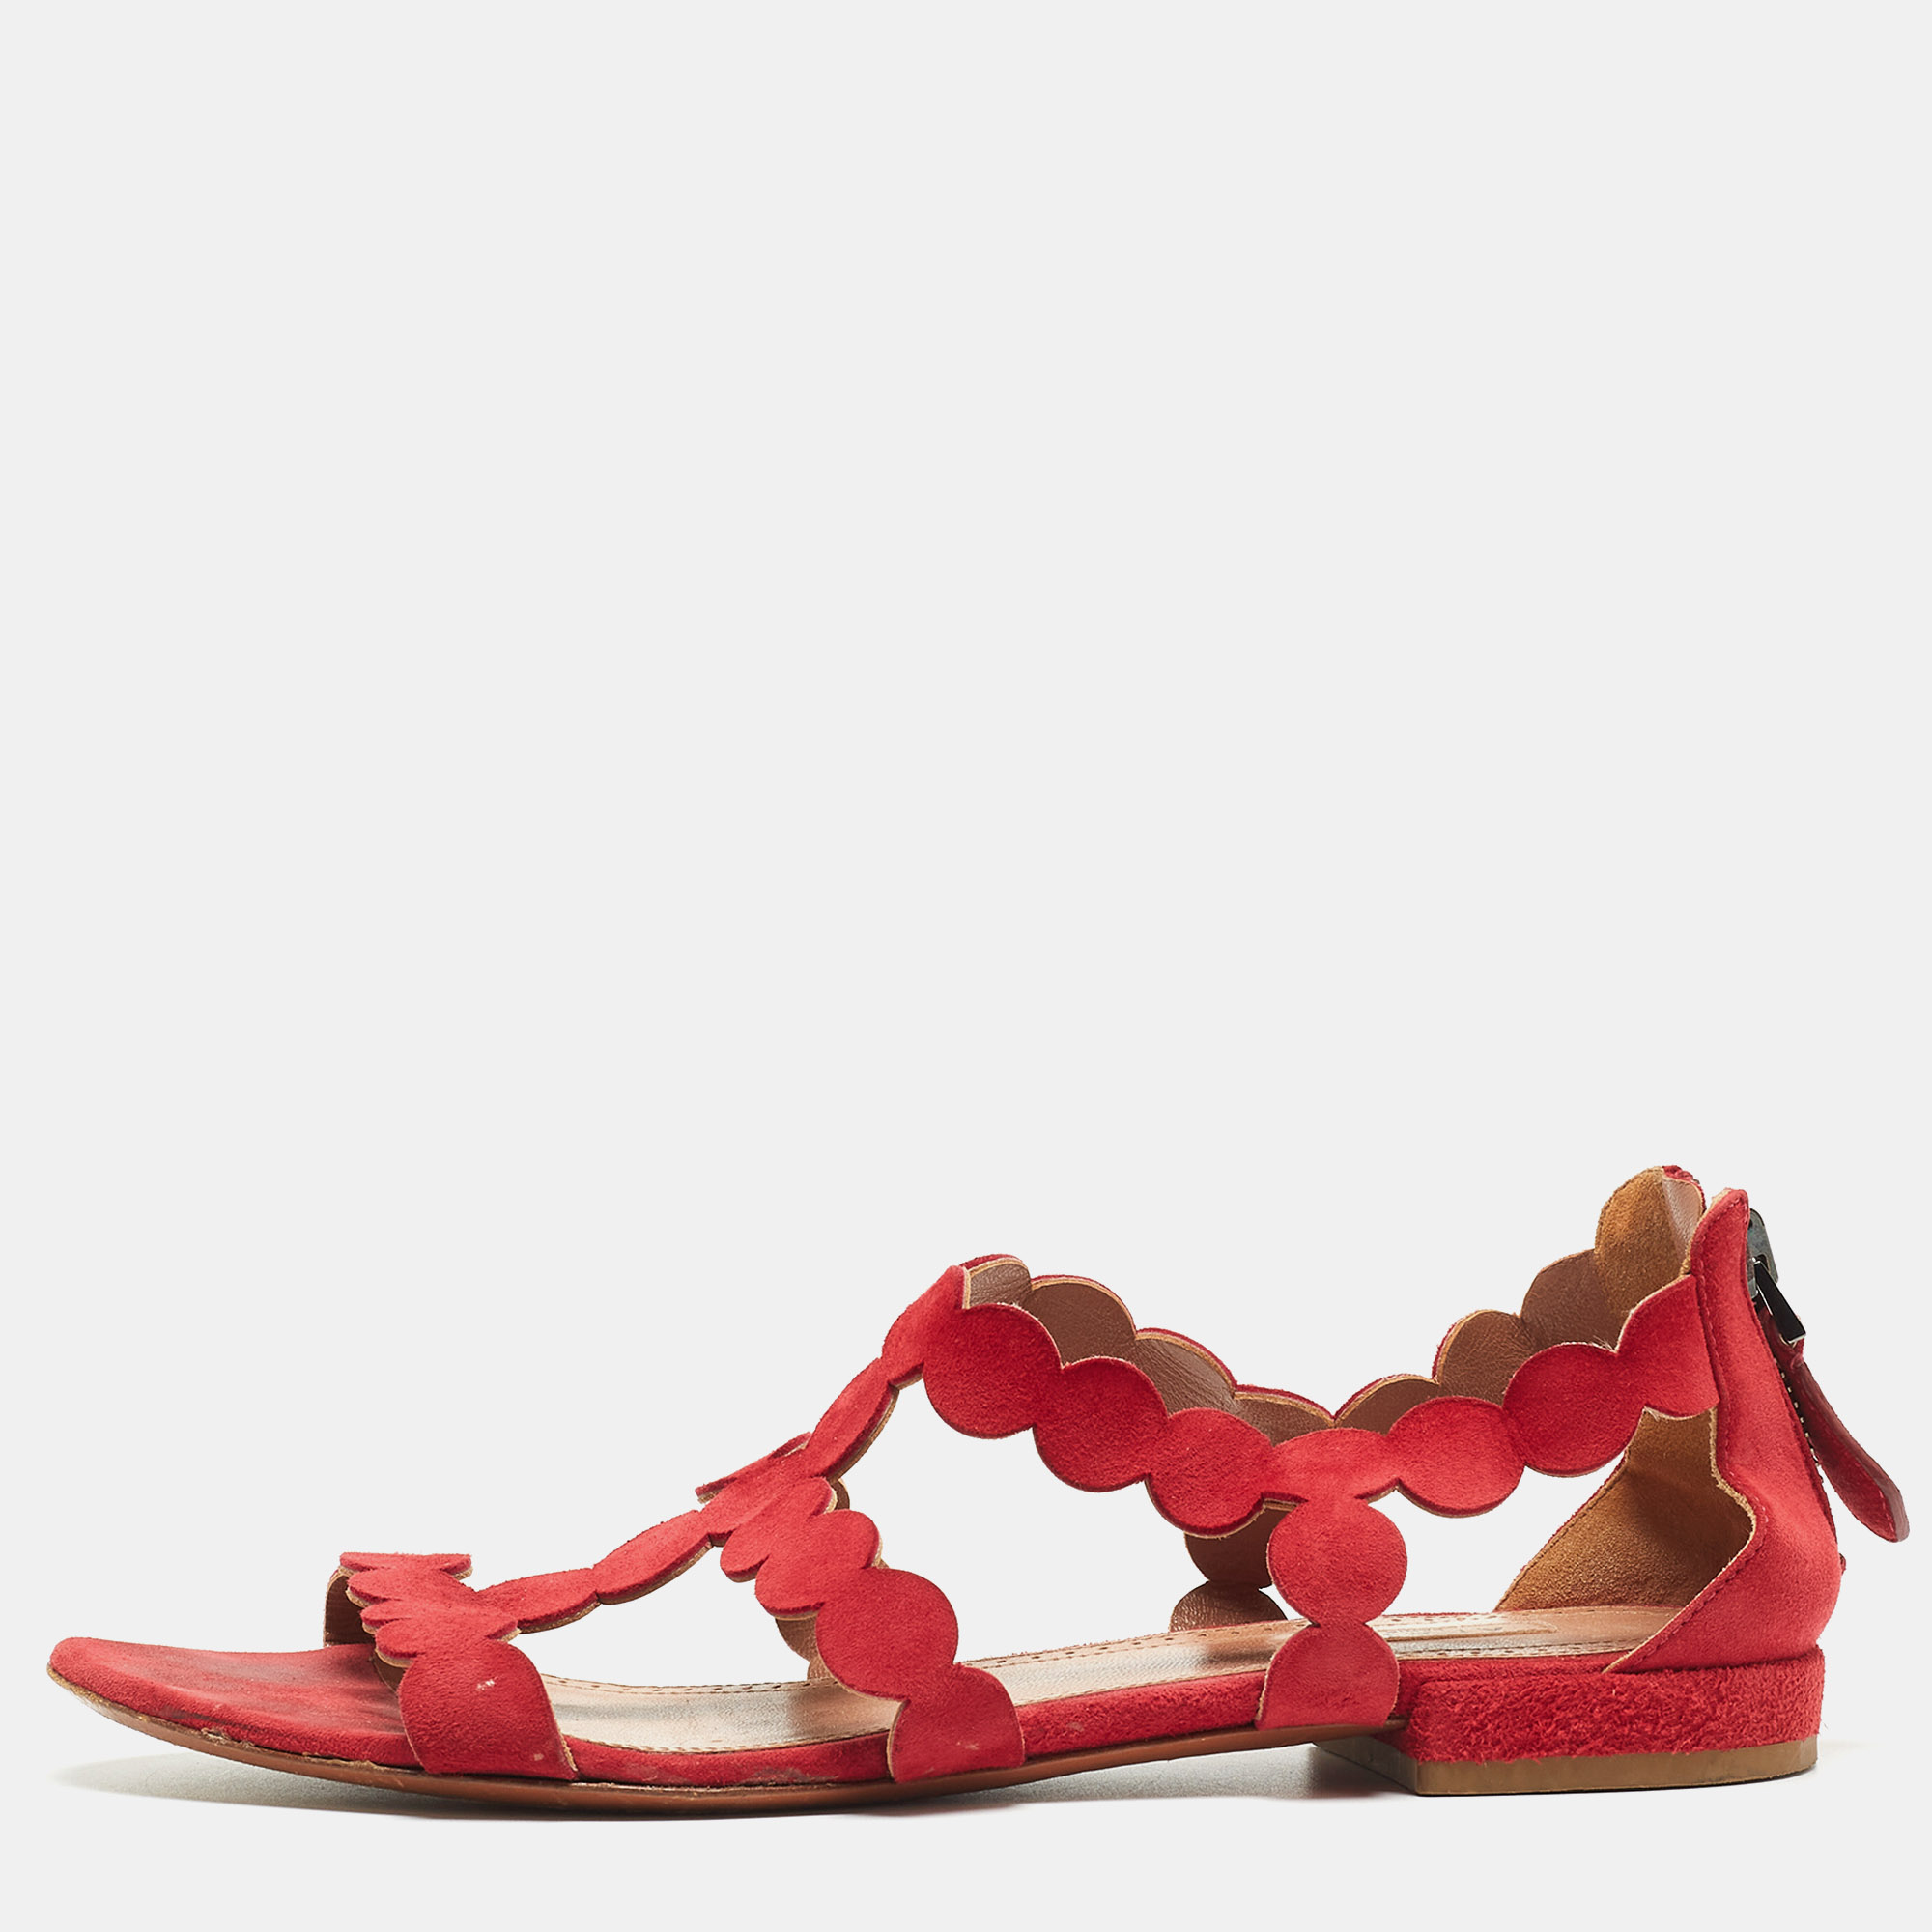 Alaia Red Suede Open Toe Flat Sandals Size 38.5